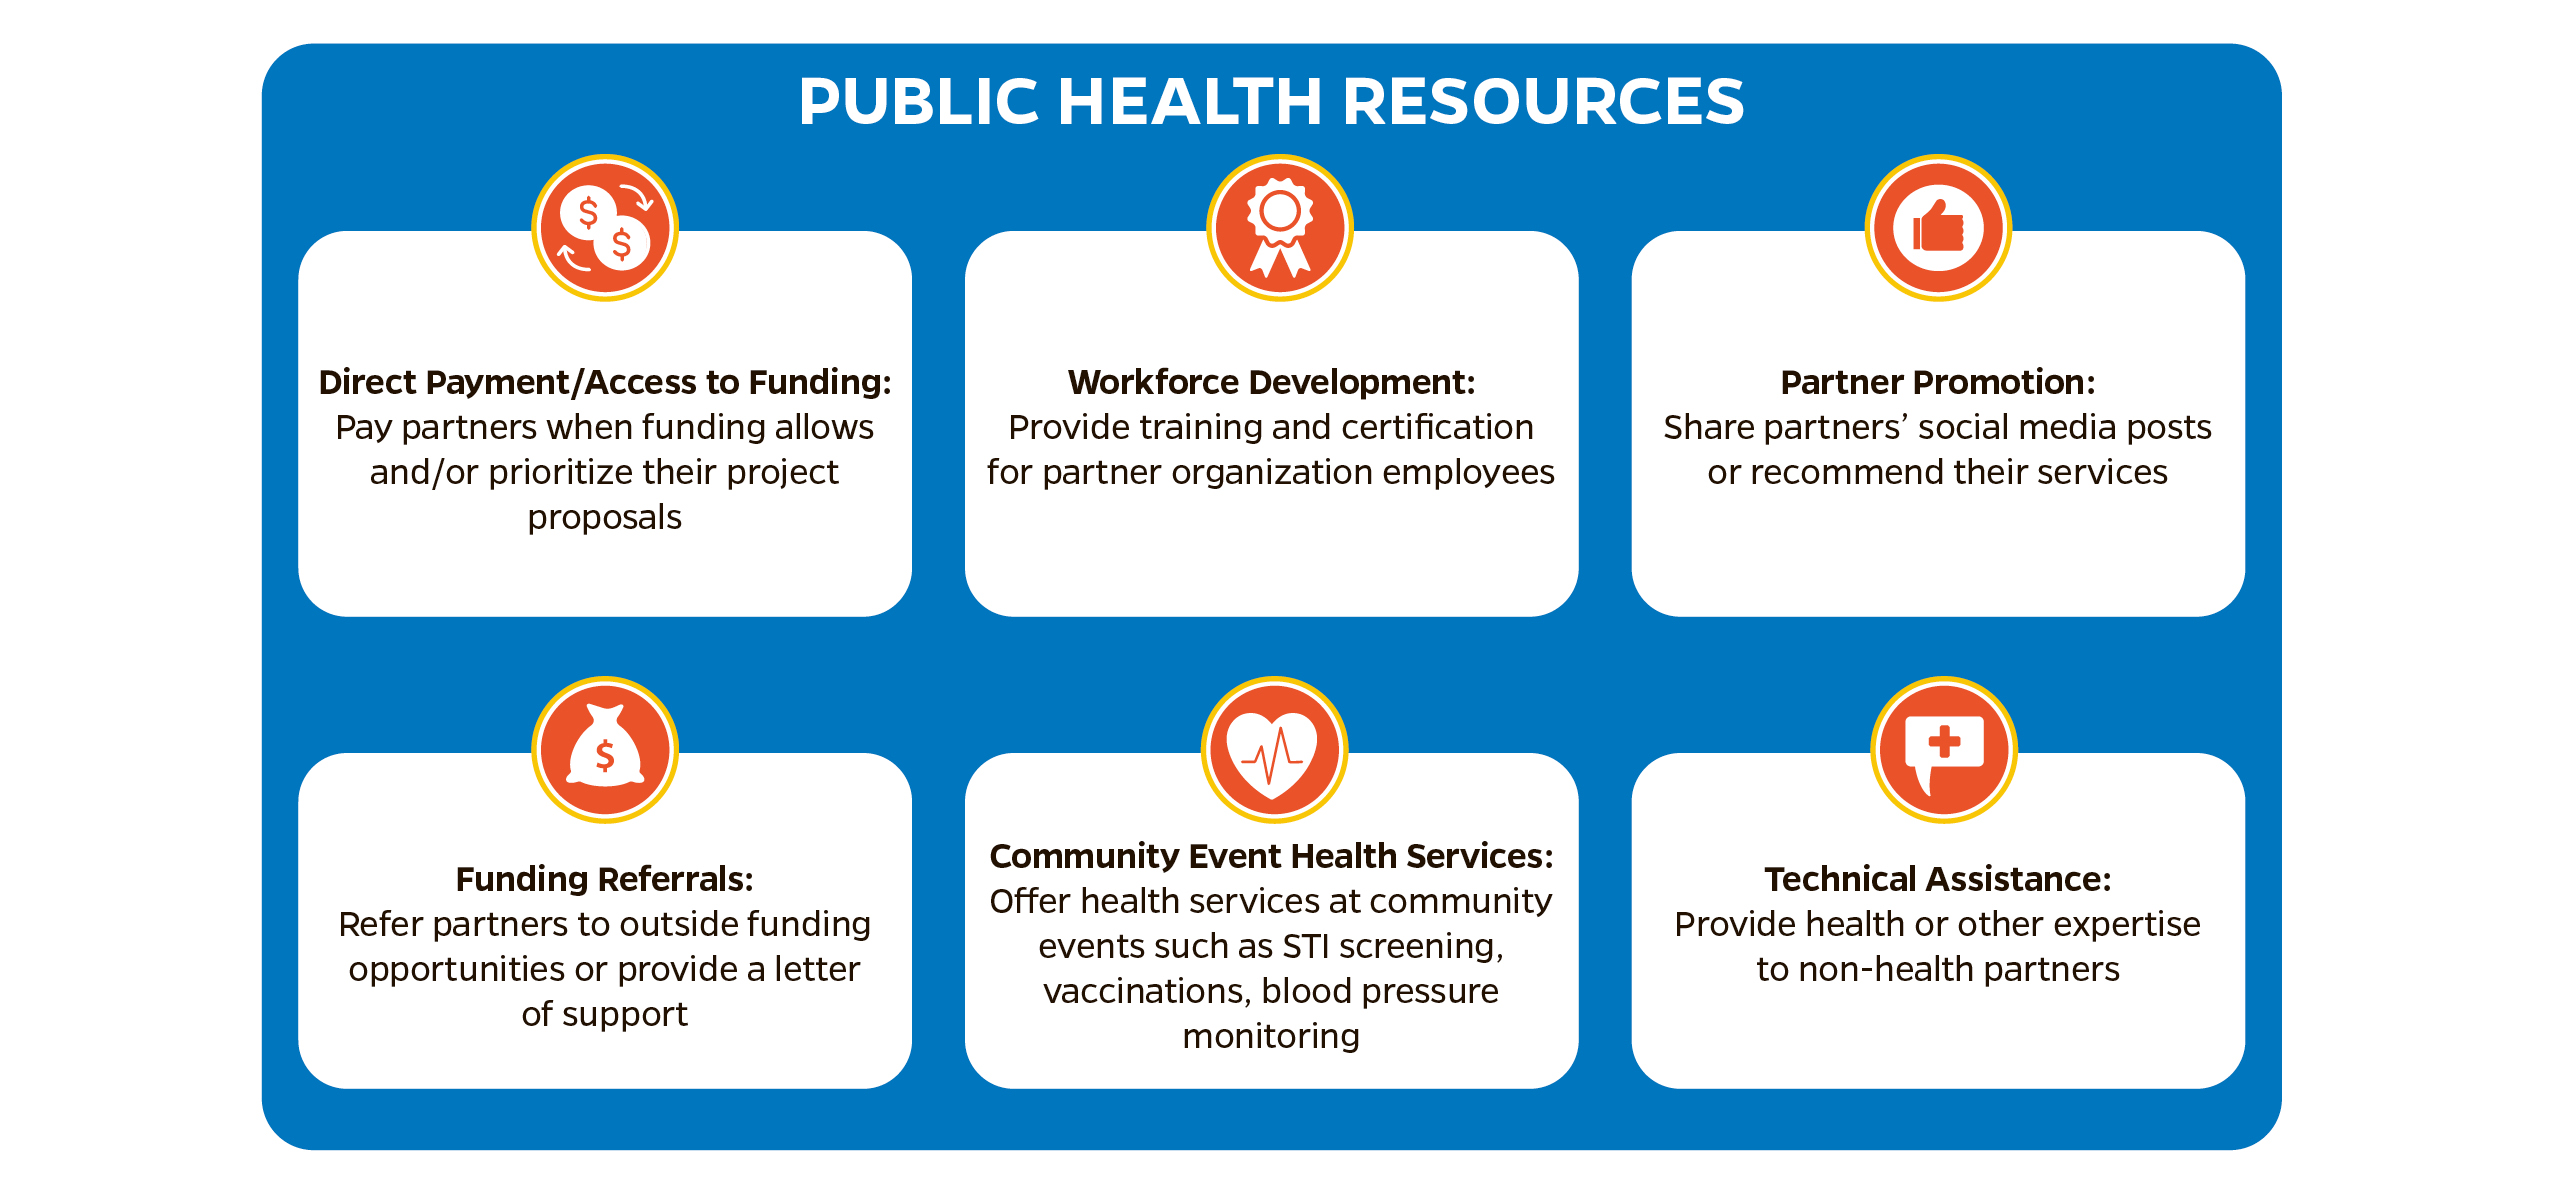 TRUST, Examples of public health resources that can be shared as benefits for secondary messengers